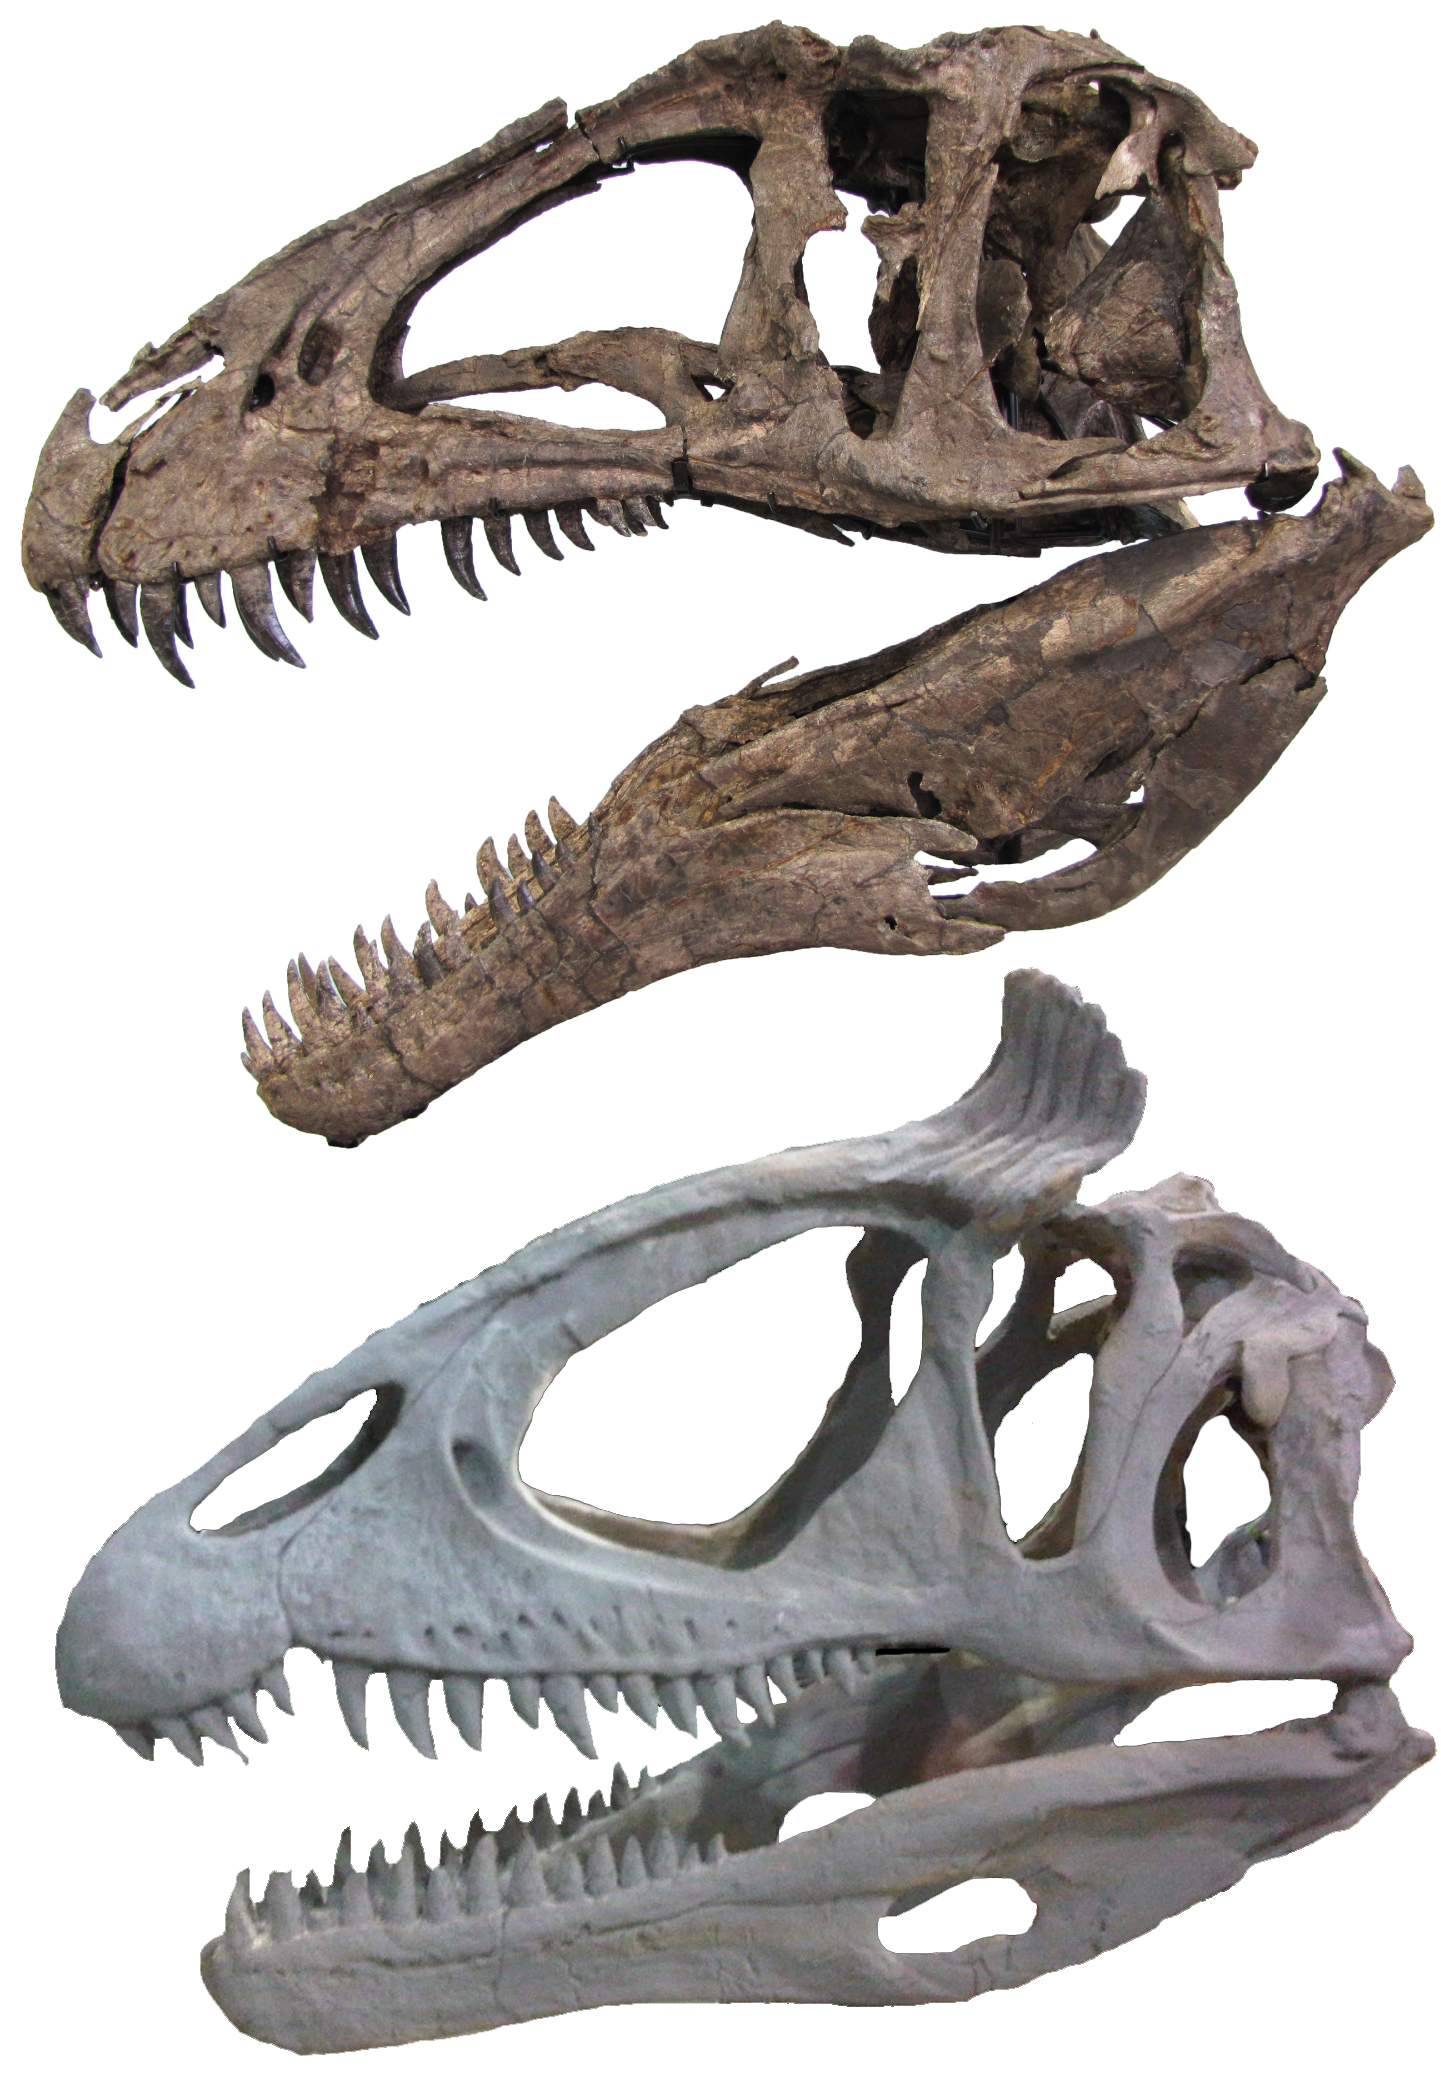 Outrageous heads led to outrageously large dinosaurs